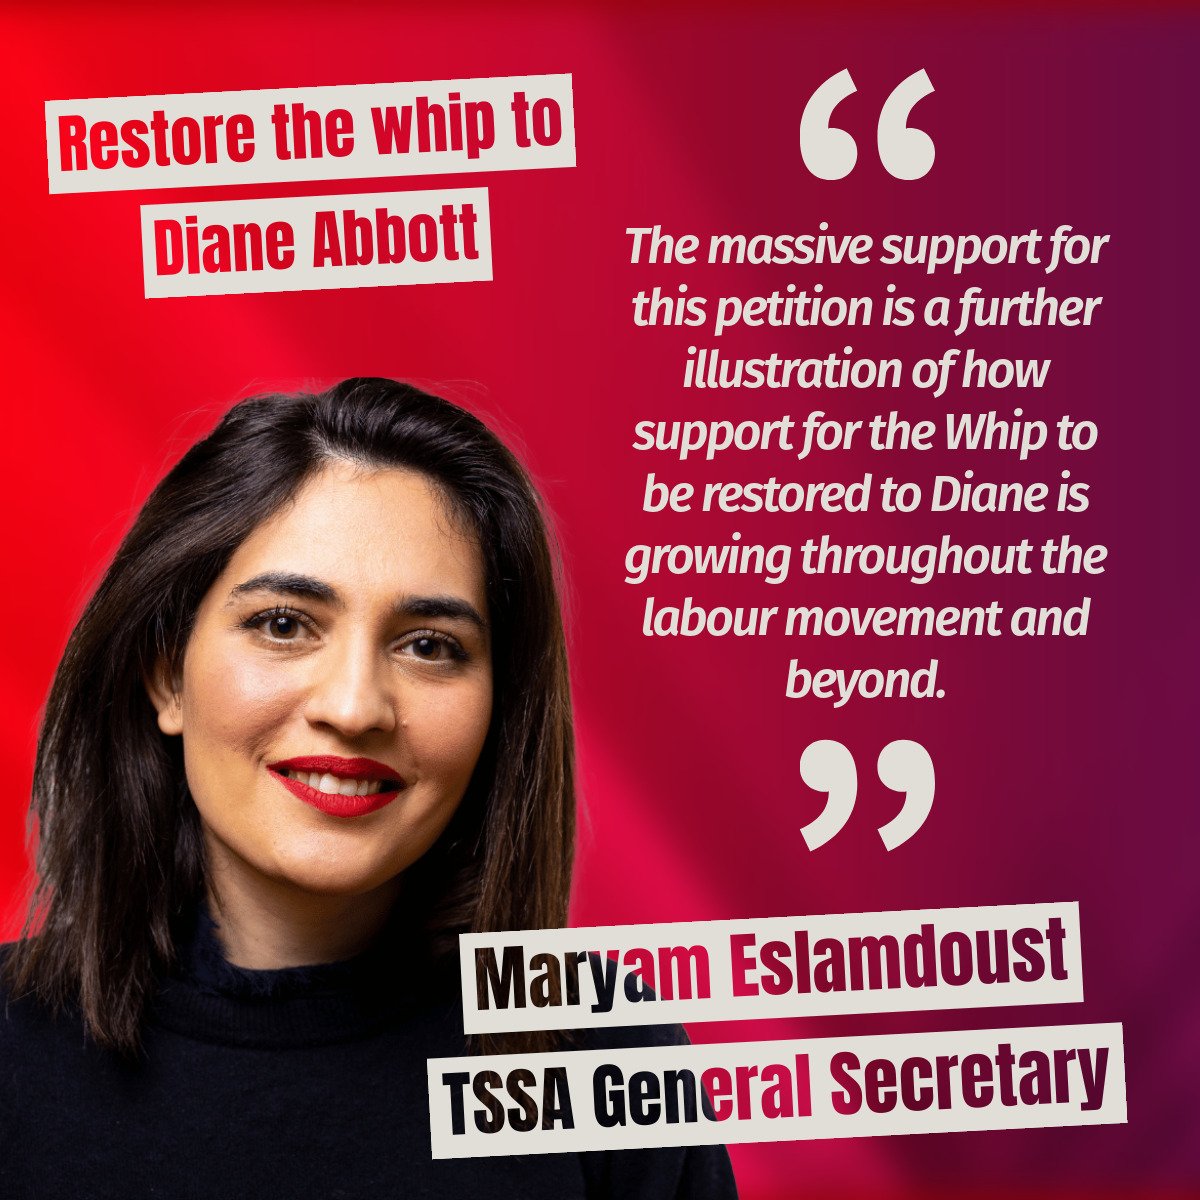 General Secretary of the @TSSAunion @MEslamdoust on the petition calling for the party leadership to #RestoreTheWhip to @HackneyAbbott (an MP who has consistently supported their campaigns) reaching over 11,000 signatures- you can add yours here: actionnetwork.org/petitions/rest…